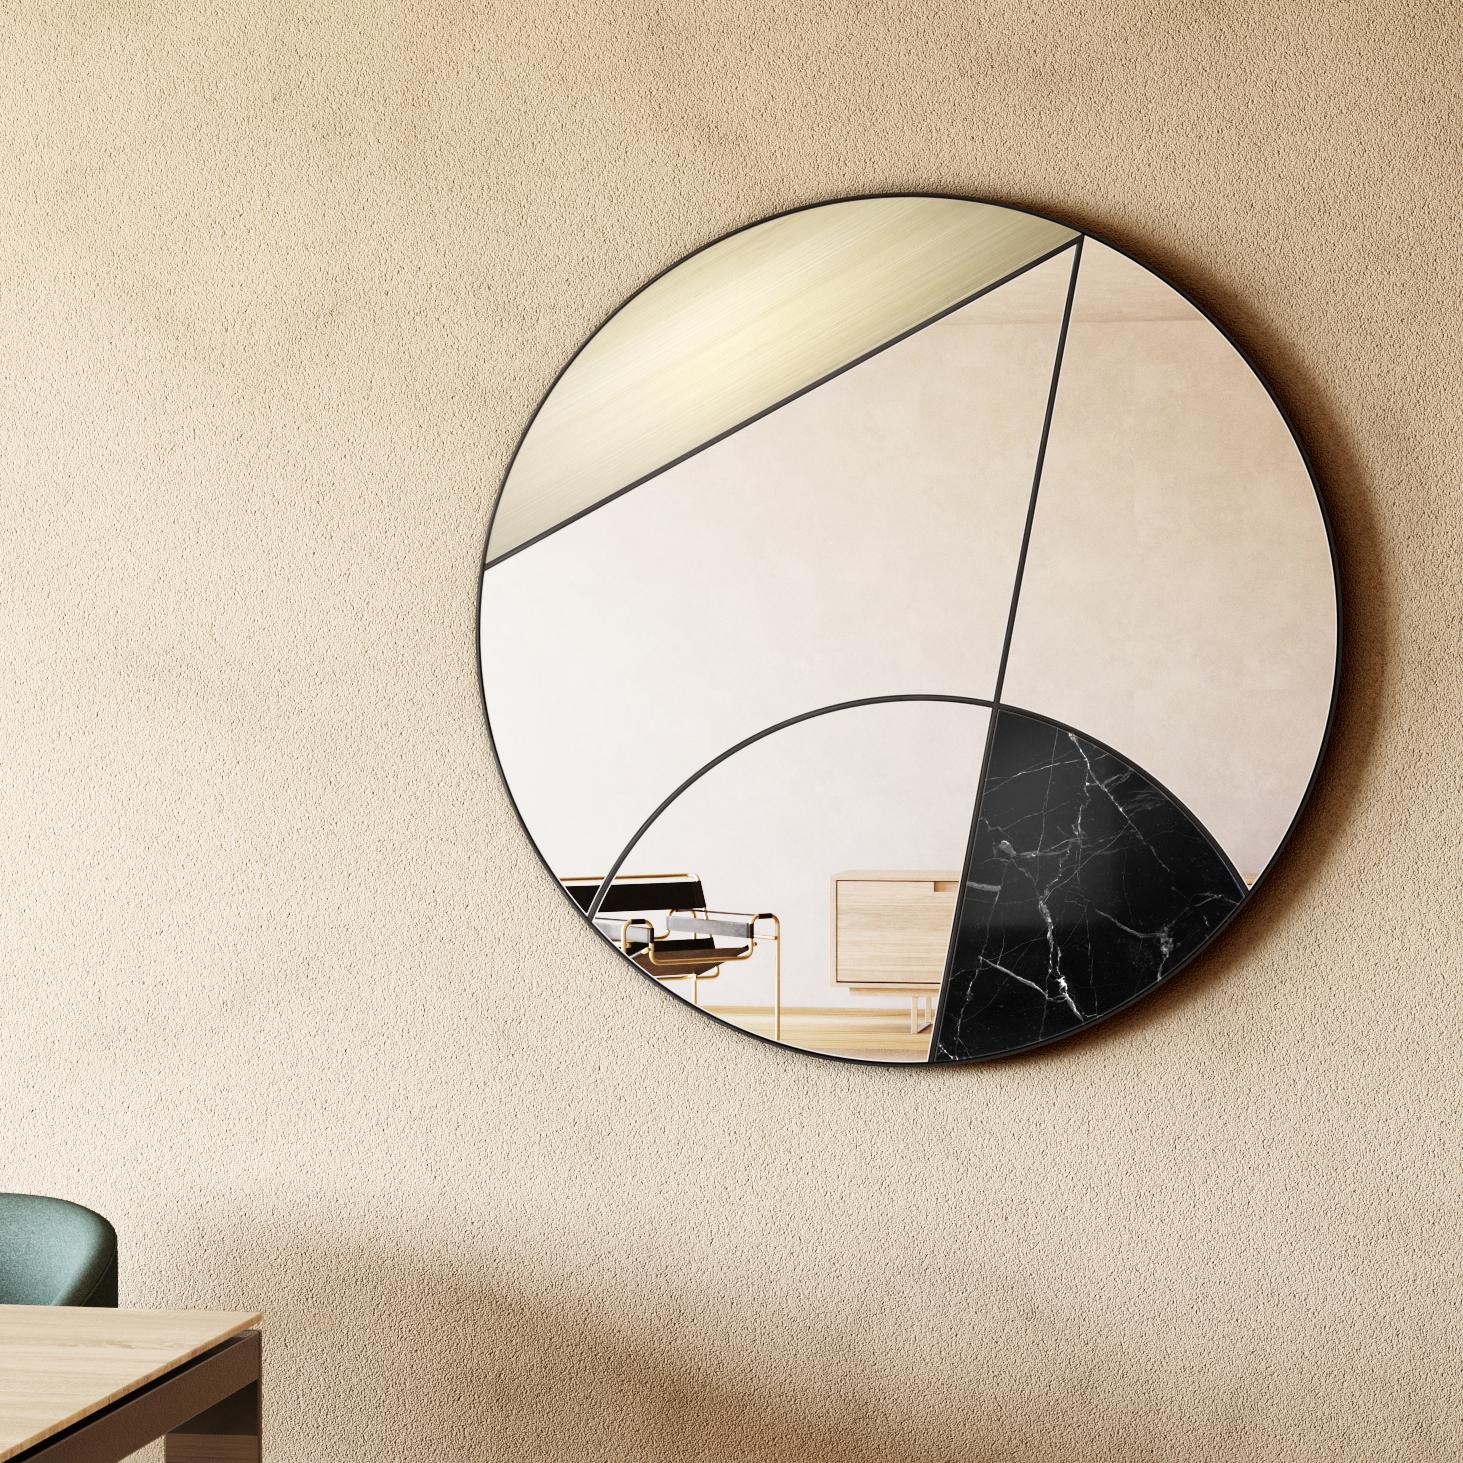 Eclipsis I

The fascinating performance of the moon casting its shadow onto Earth inspired this mirror by Atlasproject. The typical geometries of the design and the refined materials guarantee a seductive and brilliant result, as a tribute to our